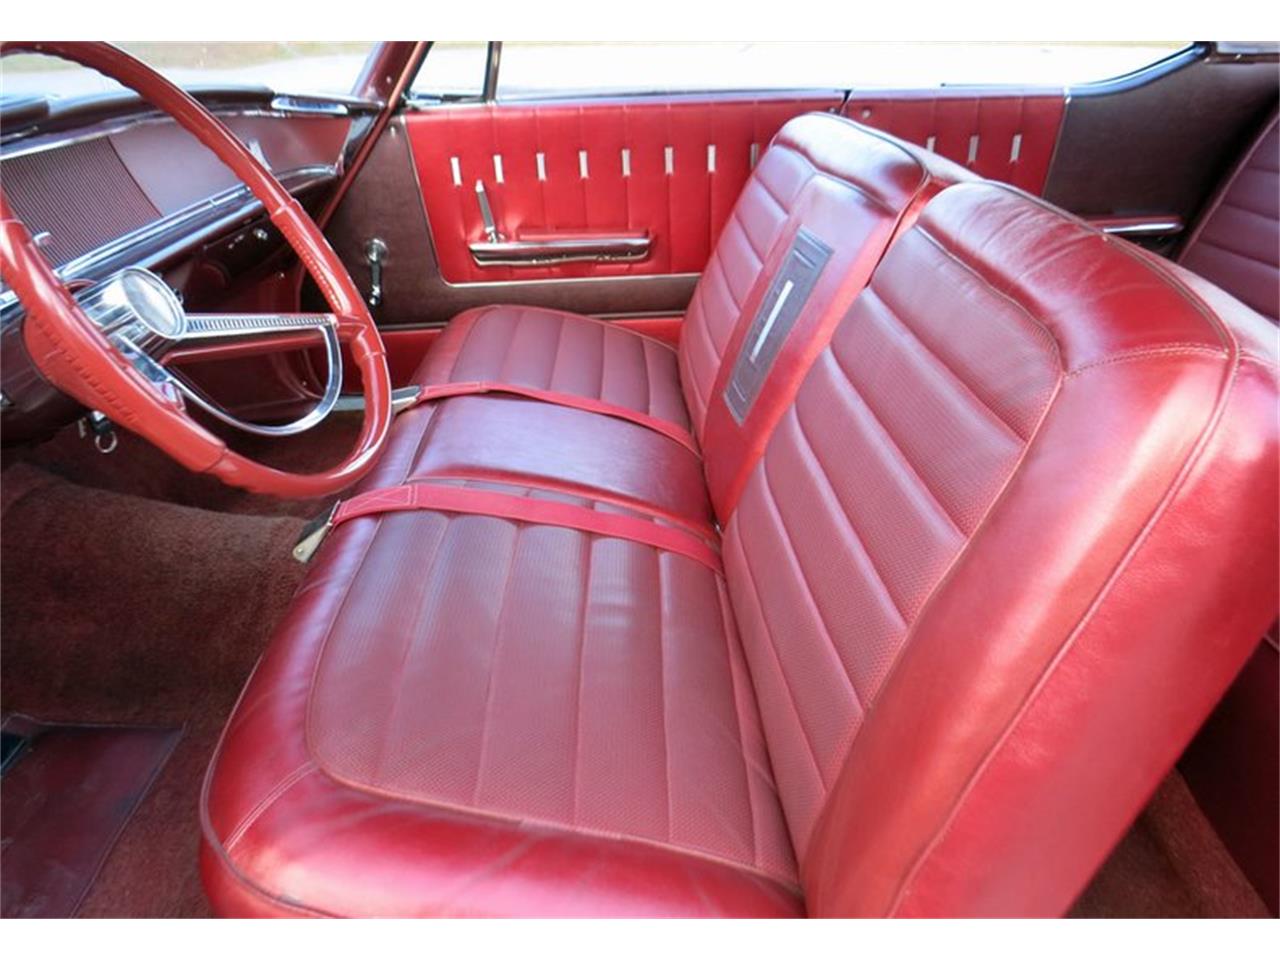 1964 Chrysler Newport for sale in West Chester, PA – photo 60